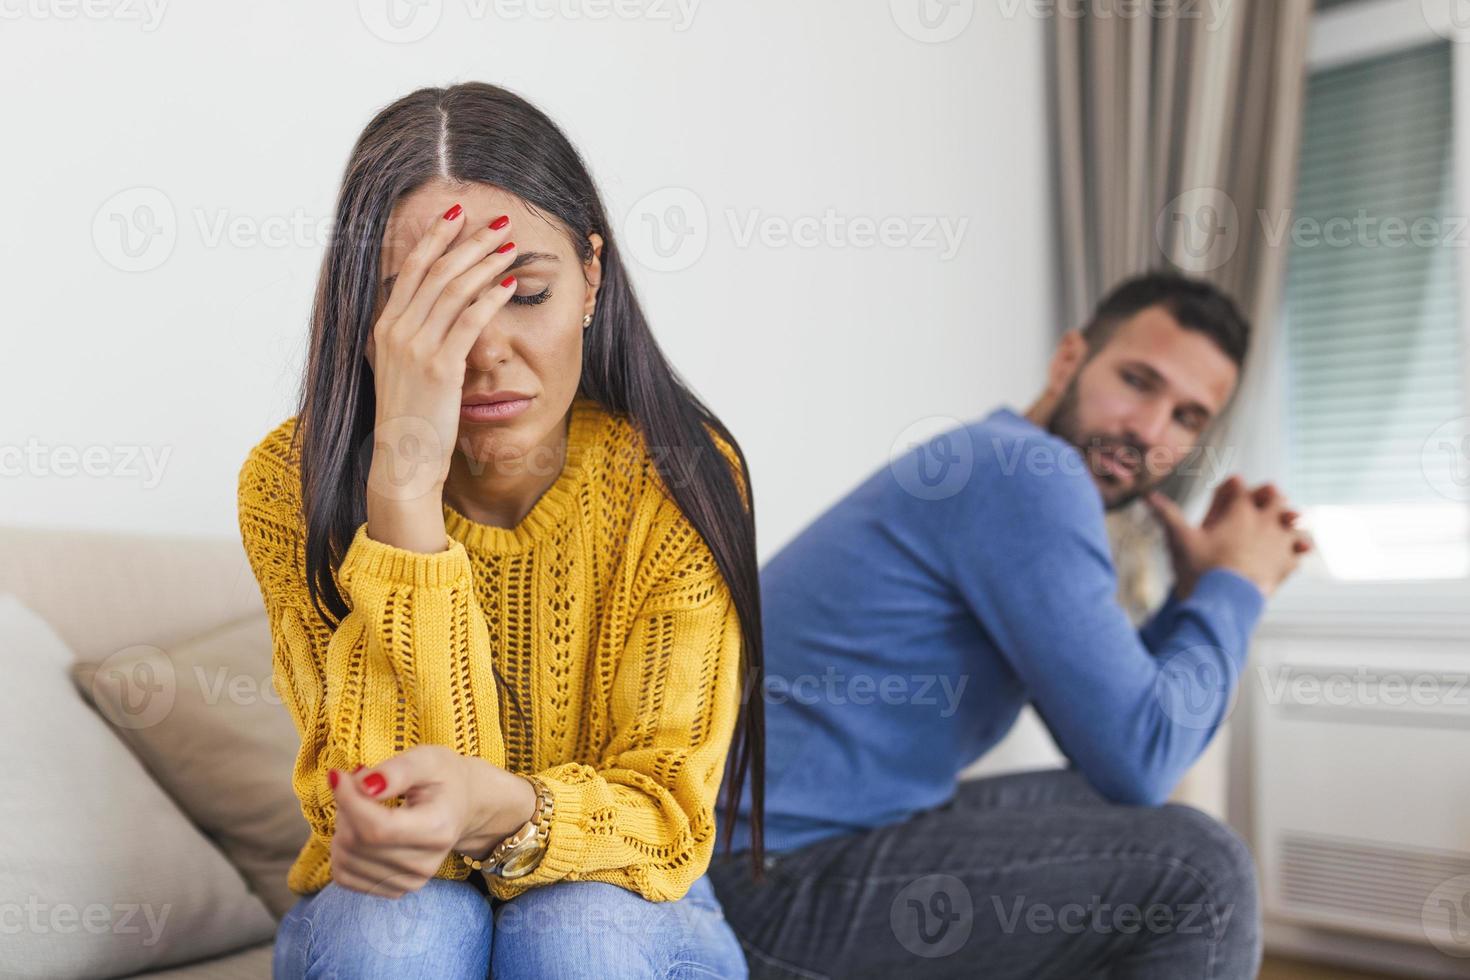 Sad pensive young girl thinking of relationships problems sitting on sofa with offended boyfriend, conflicts in marriage, upset couple after fight dispute, making decision of breaking up get divorced photo